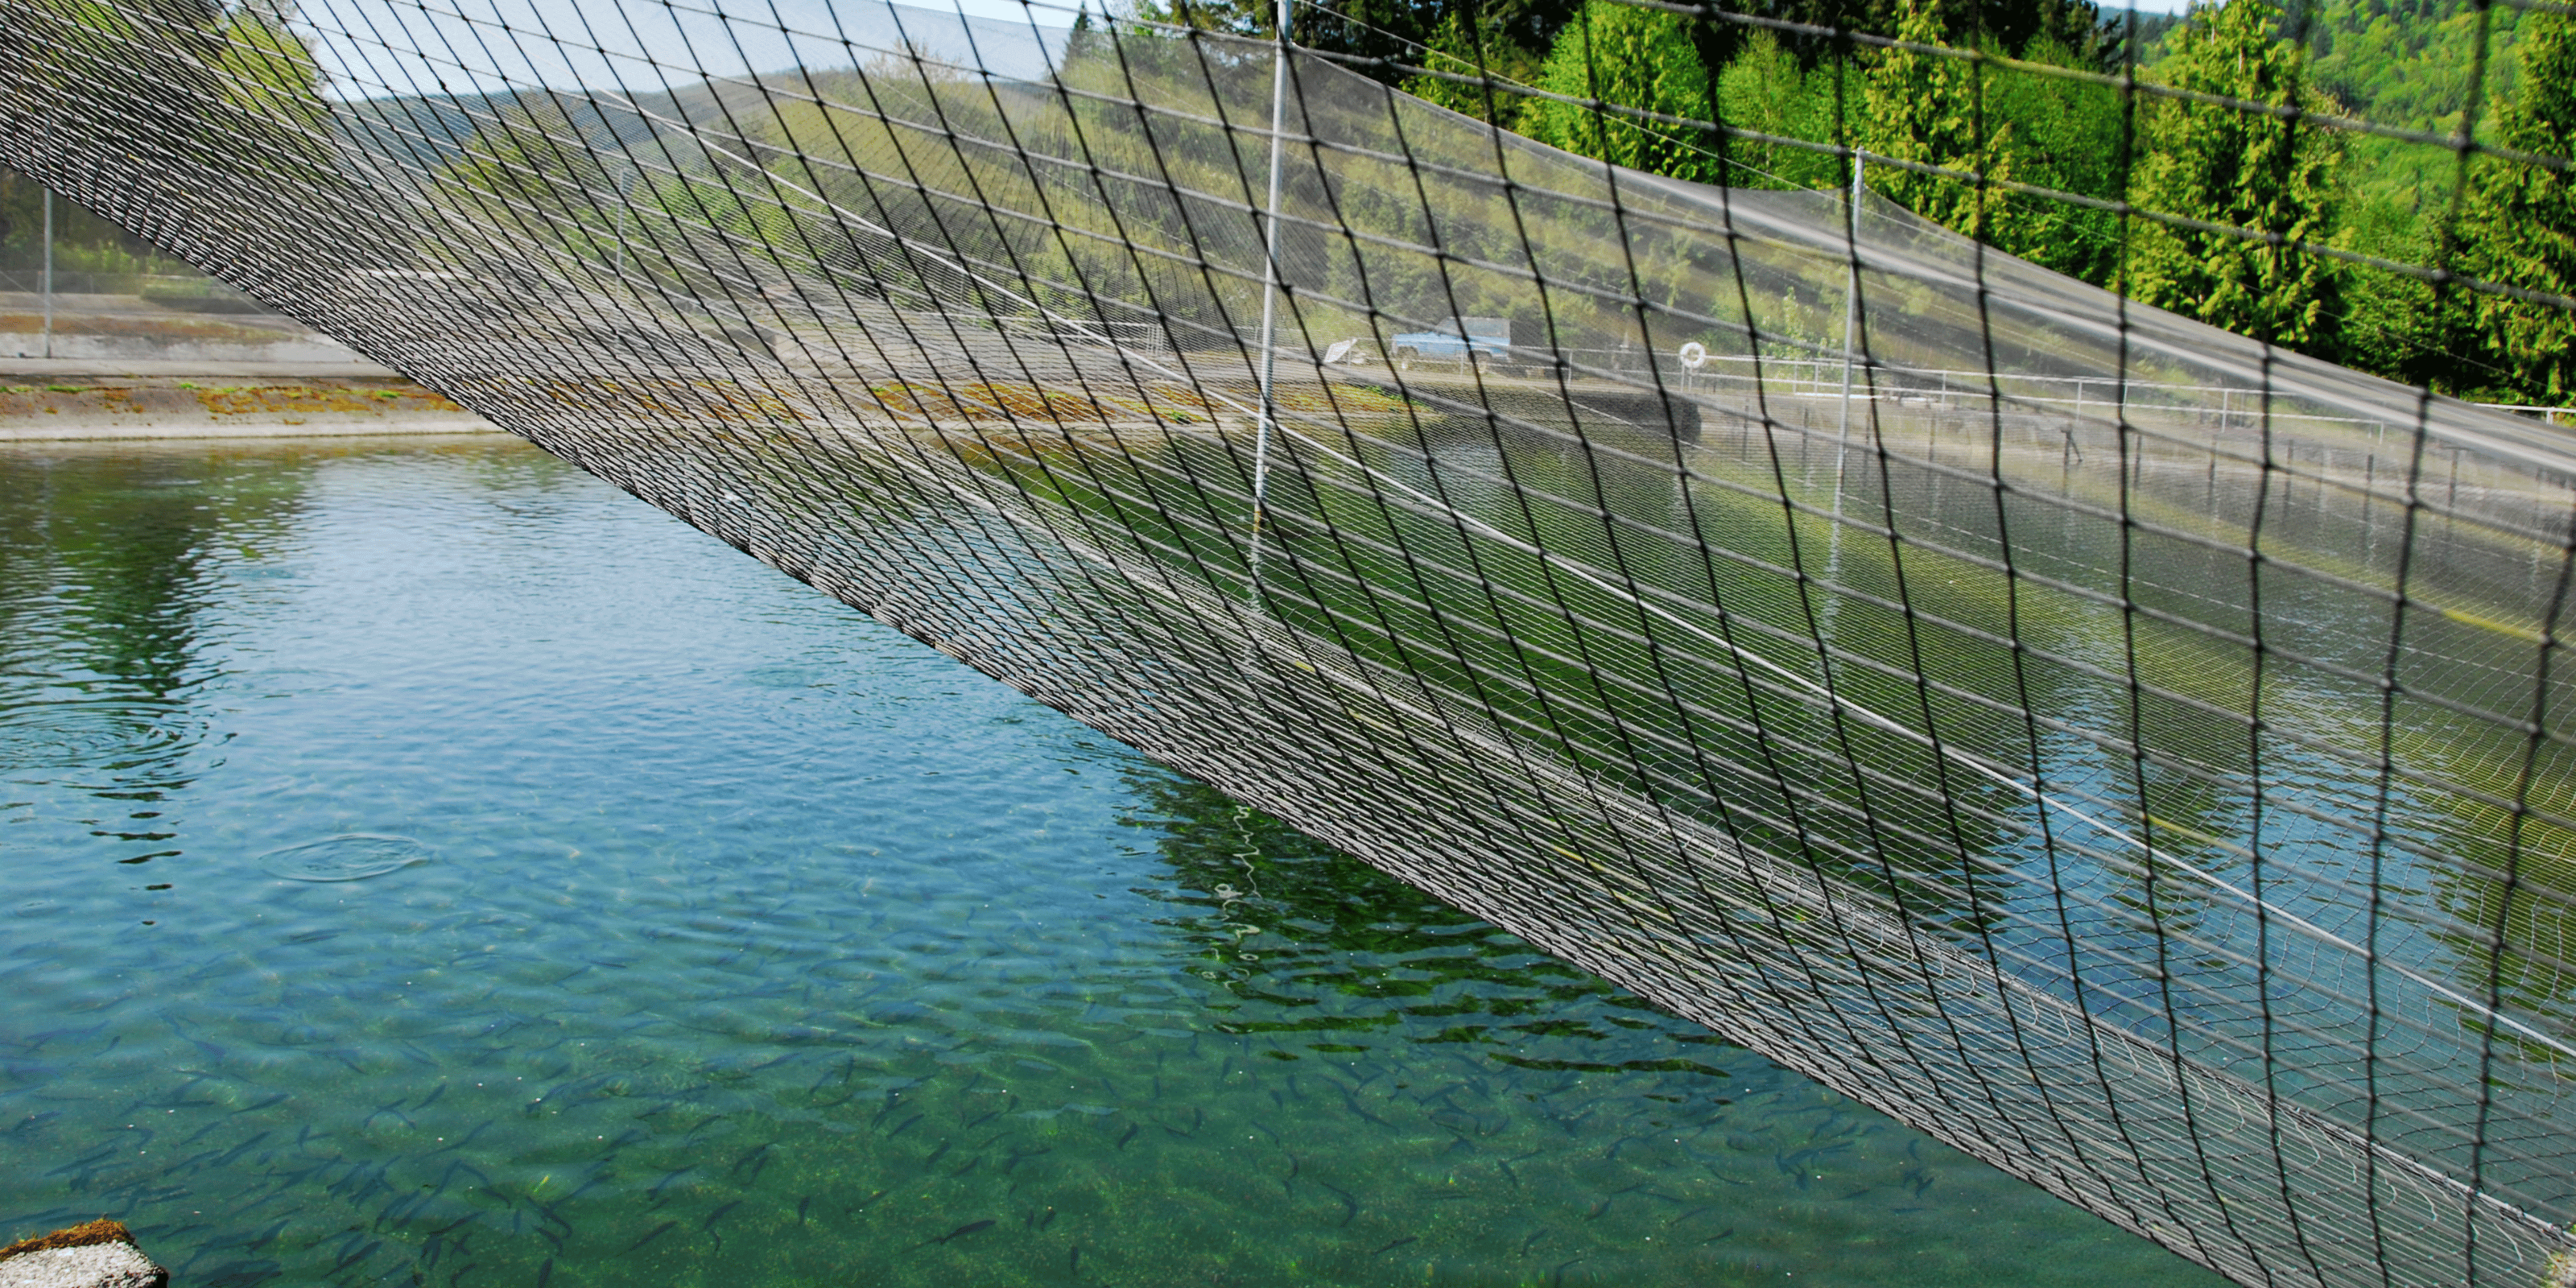 Custom Aquaculture netting protecting fish stock from bird and other predators